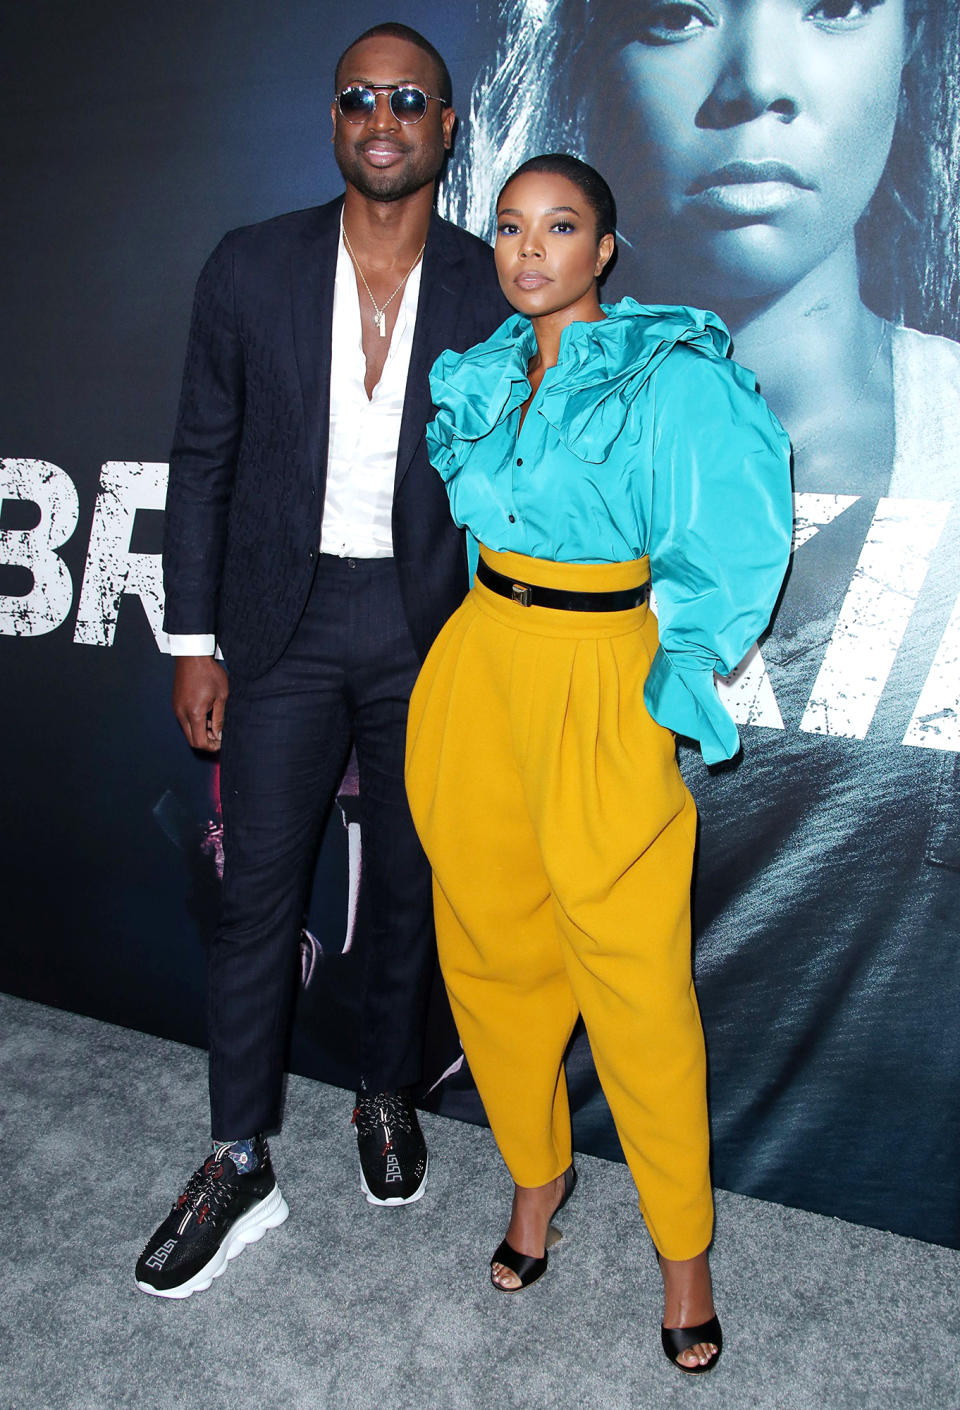 Superior style! The pair showed off their flair for fashion at the Breaking In film premiere, wearing equally fabulous and unique outfits. The L.A.'s Finest actress donned high waisted yellow pants and a voluminous turquoise top. Wade showed off his stylish side in a slim fit suit which he teamed with sunglasses and sneakers.